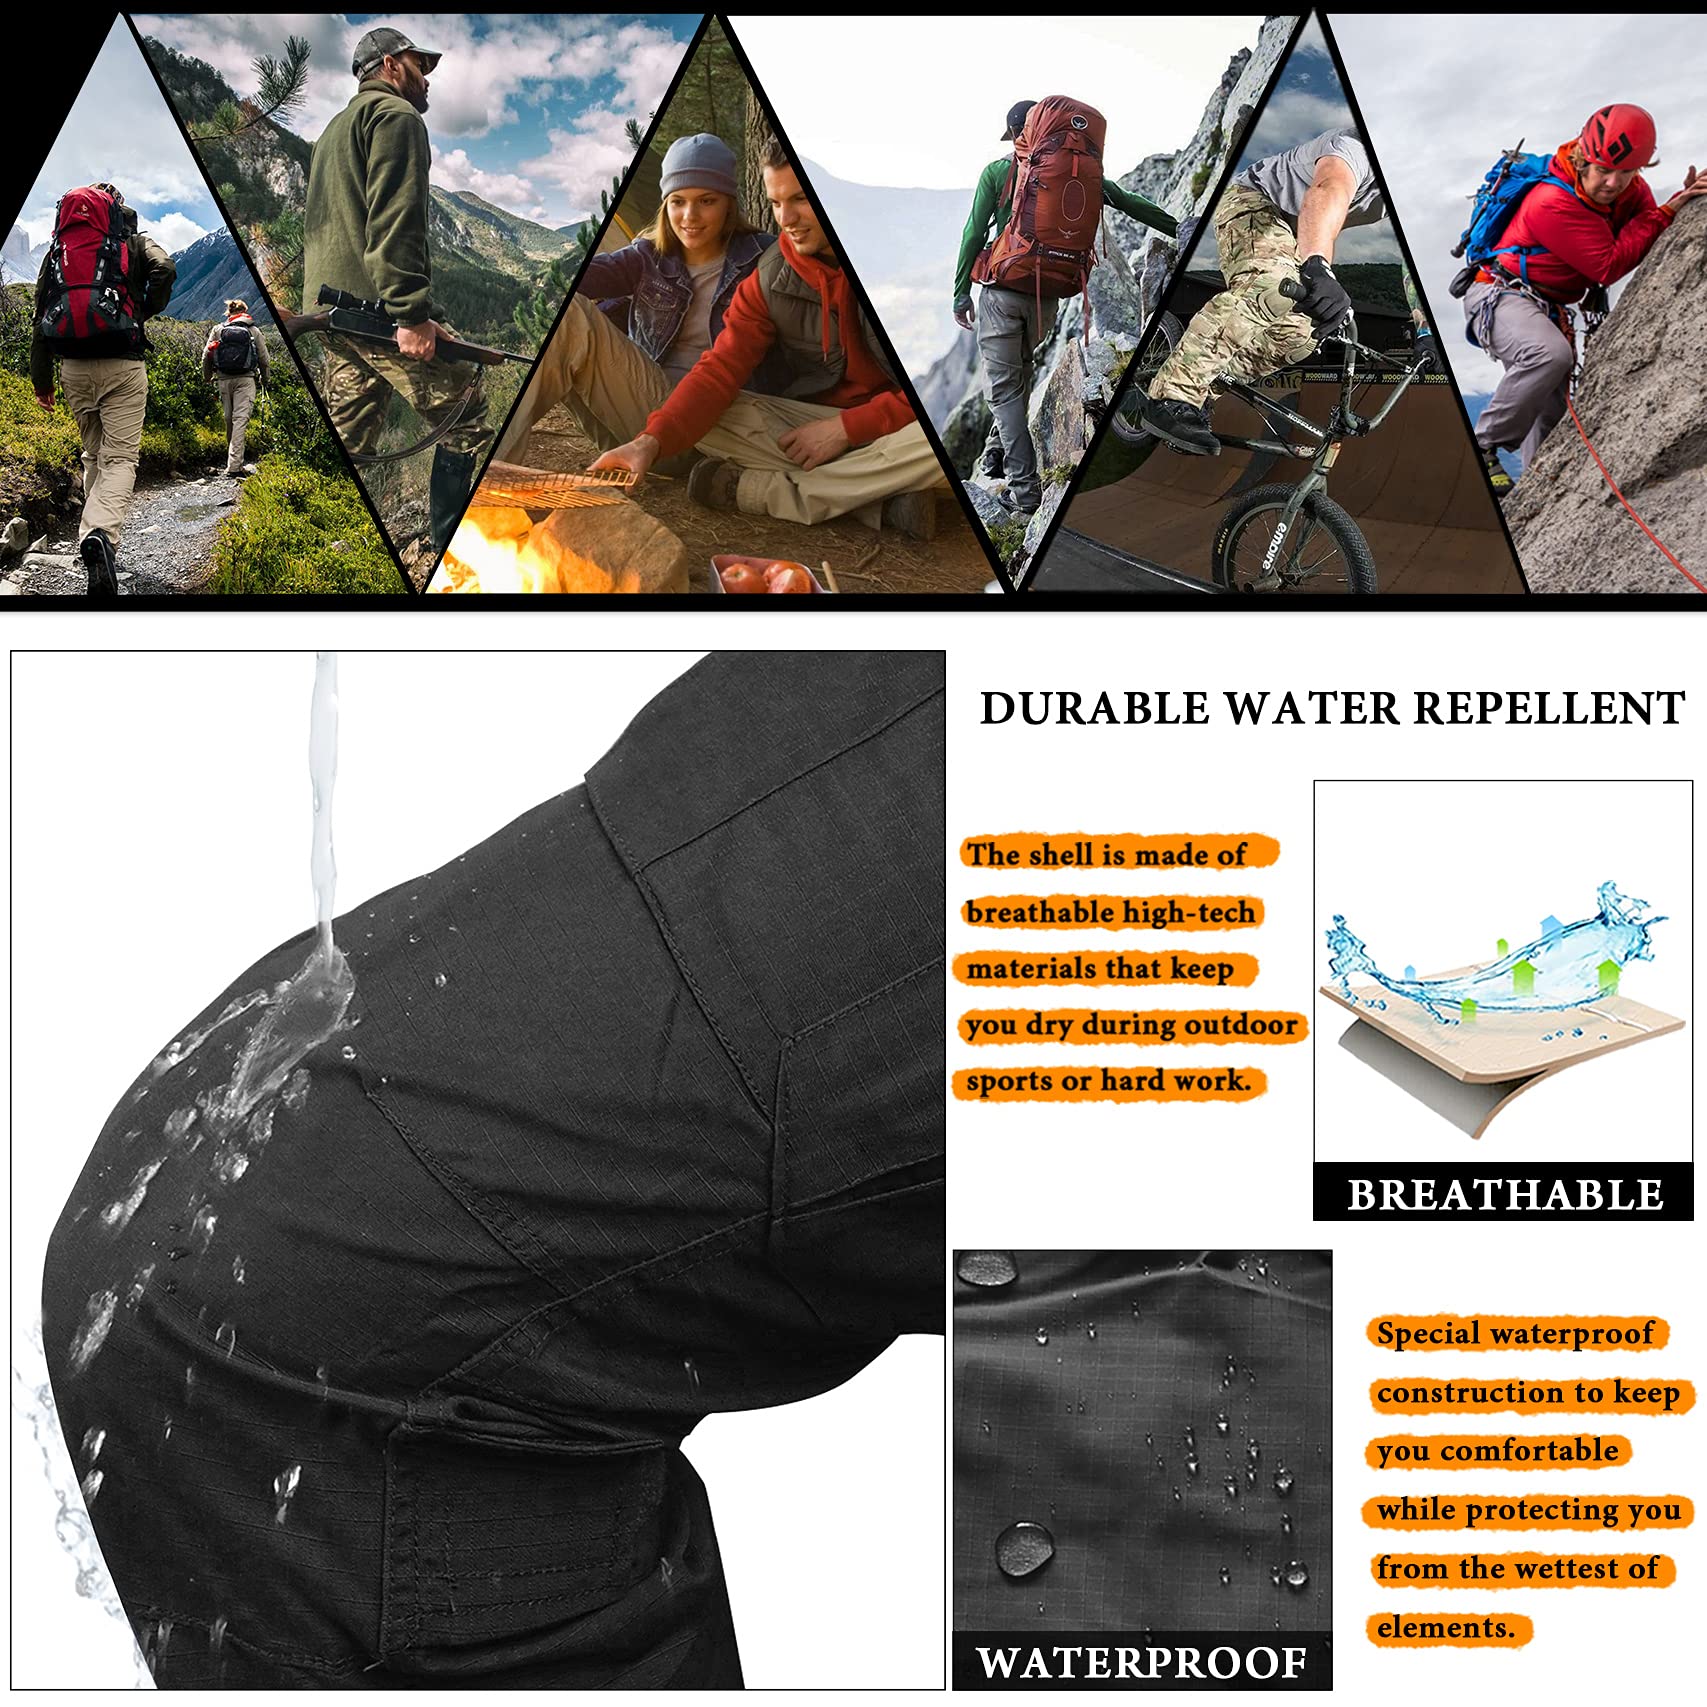 Women's Black Hills Water-Repellent Pants | Duluth Trading Company